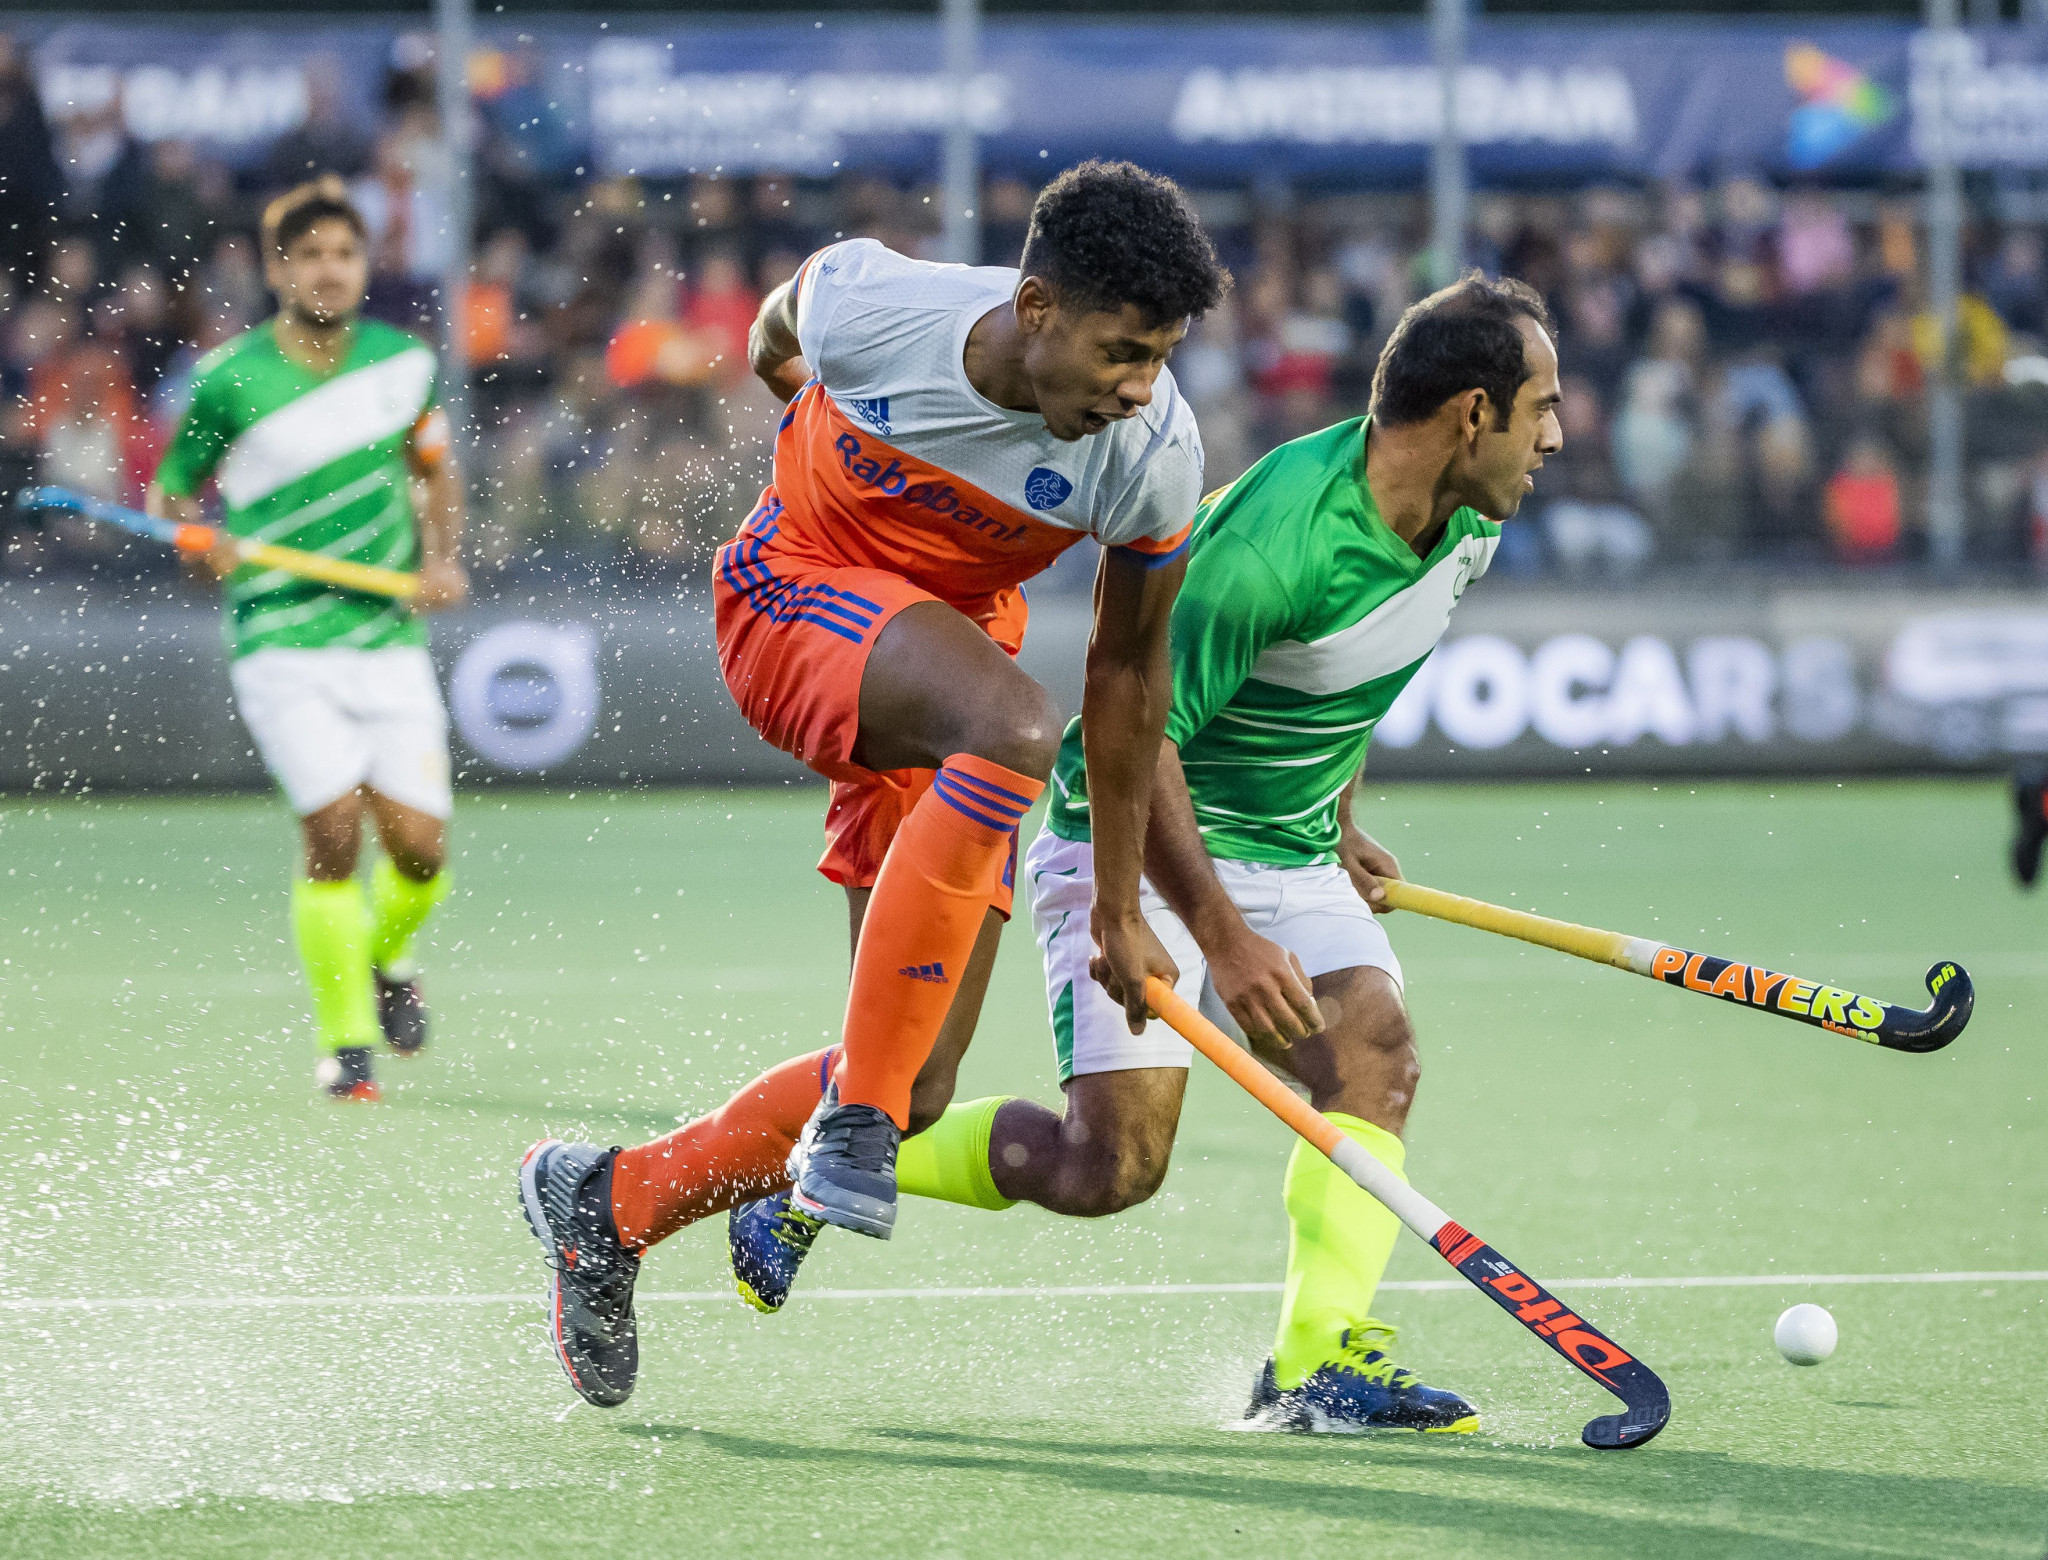 The Dutch side were far too strong for Pakistan in the second leg in Amsterdam ©Getty Images